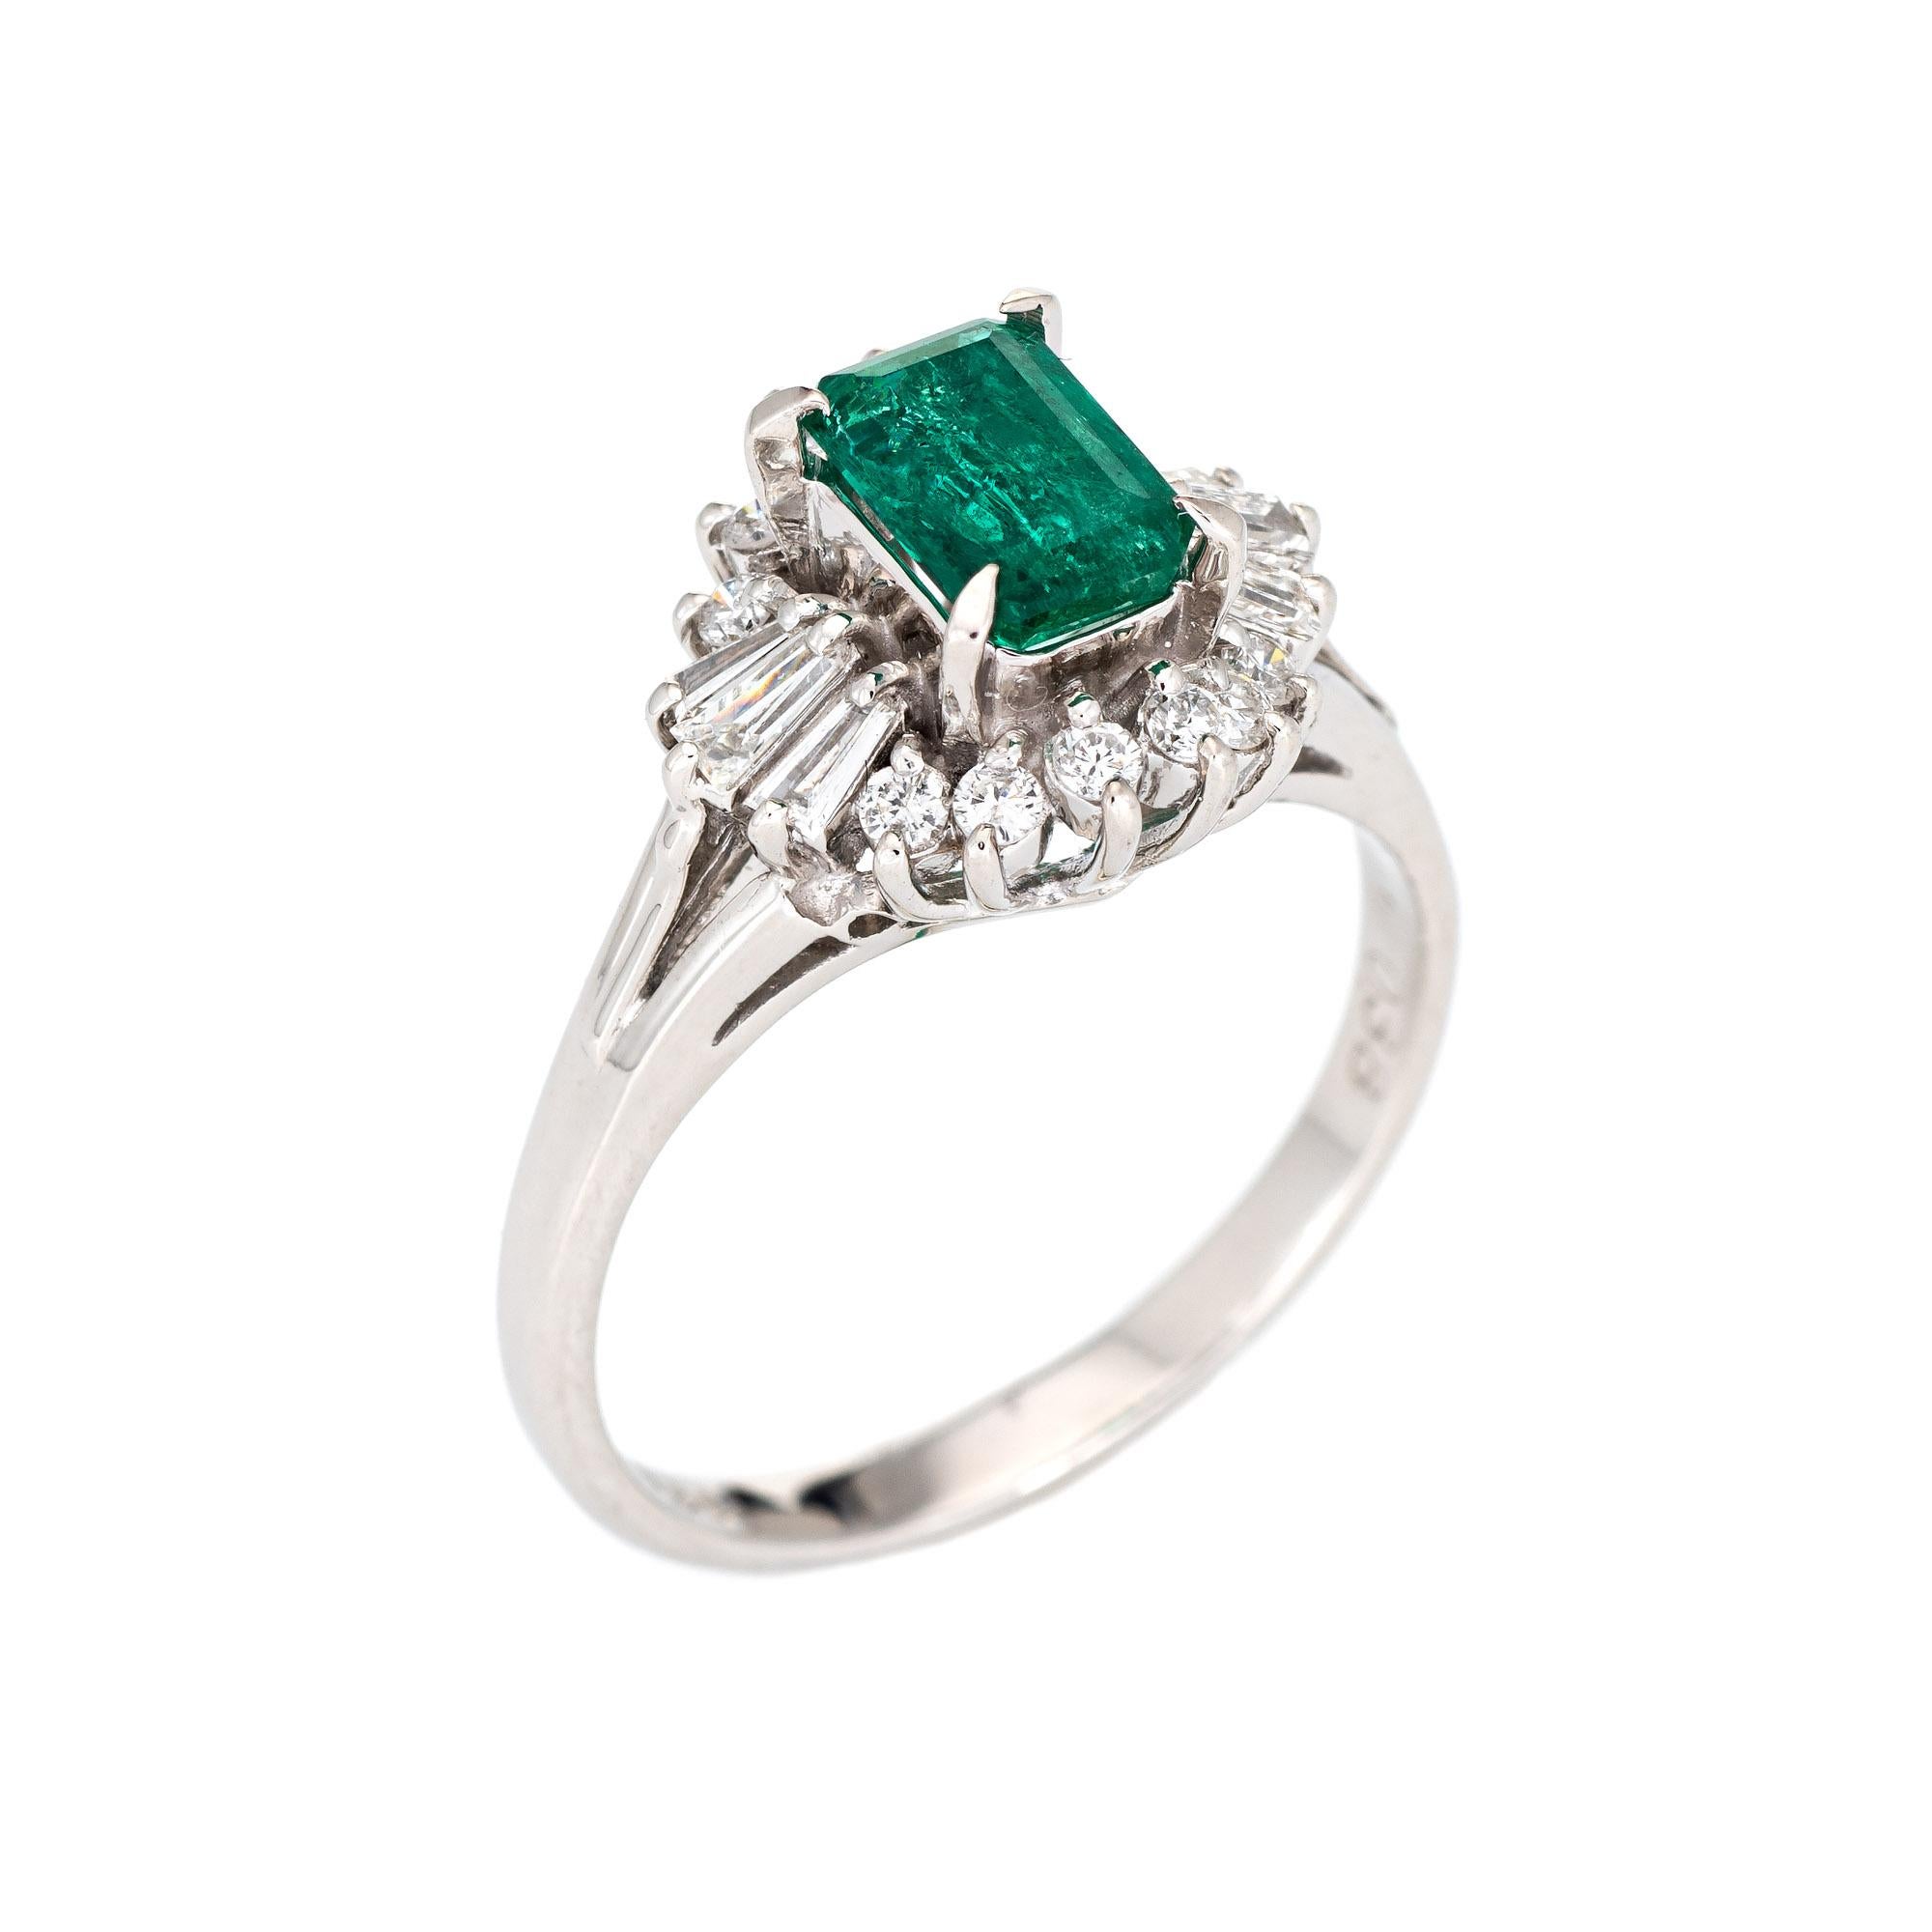 Stylish emerald & diamond ring (circa 2000s) crafted in 900 platinum. 

Round brilliant and straight baguette cut diamonds total 0.38 carats (estimated at G-H color and VS2-SI1 clarity). The emerald measures 7.25mm x 5mm (estimated at 0.88 carats).